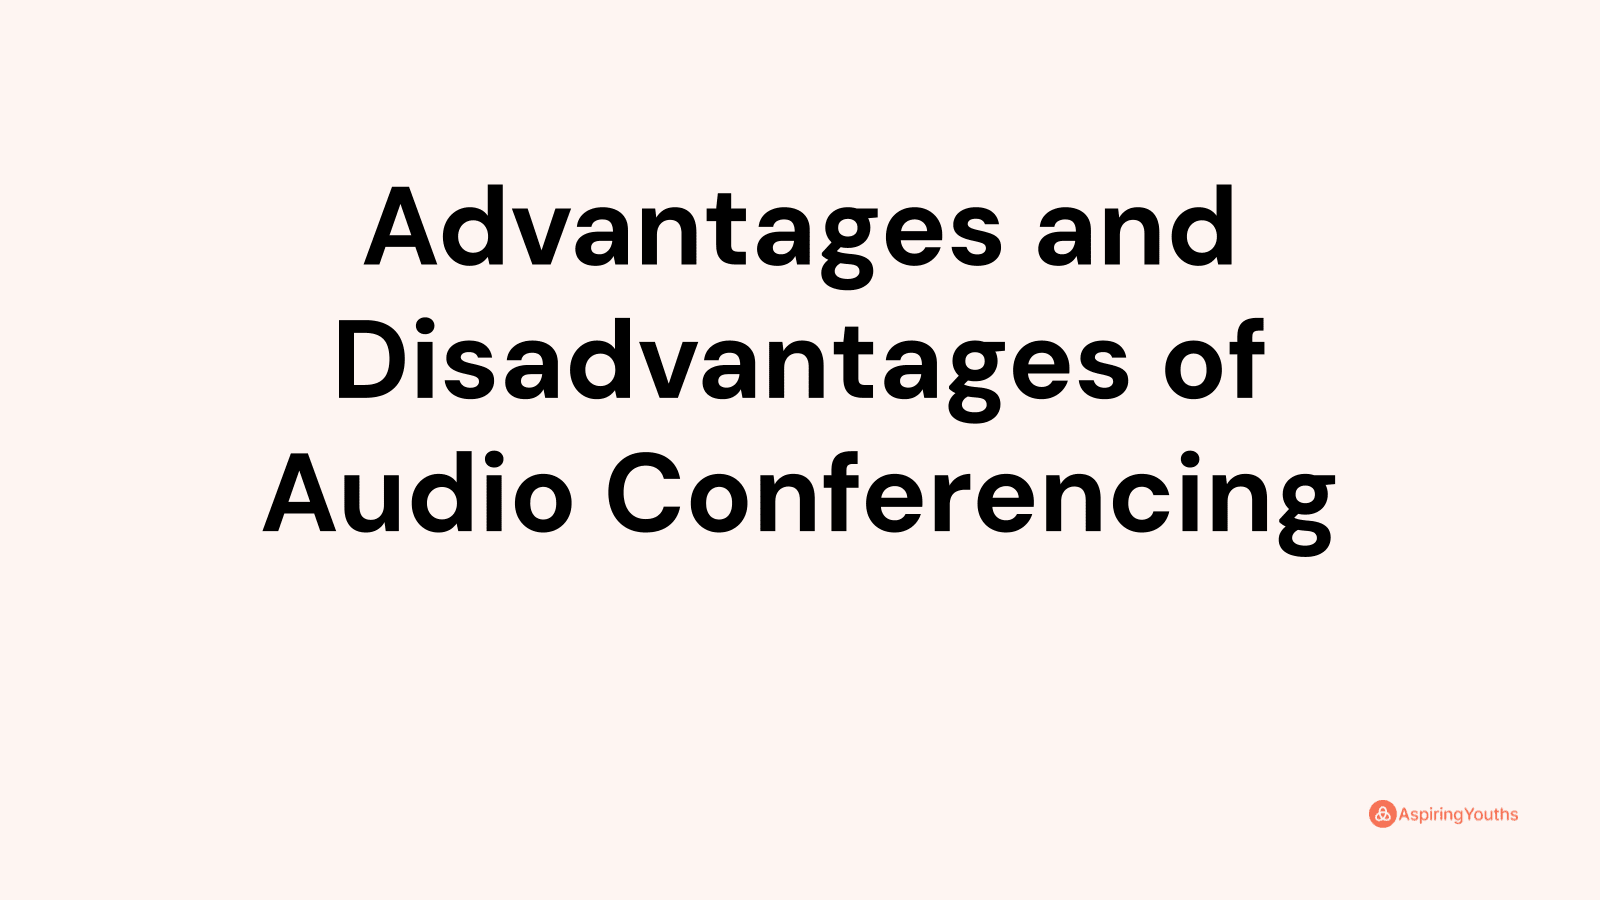 Advantages and disadvantages of Audio Conferencing